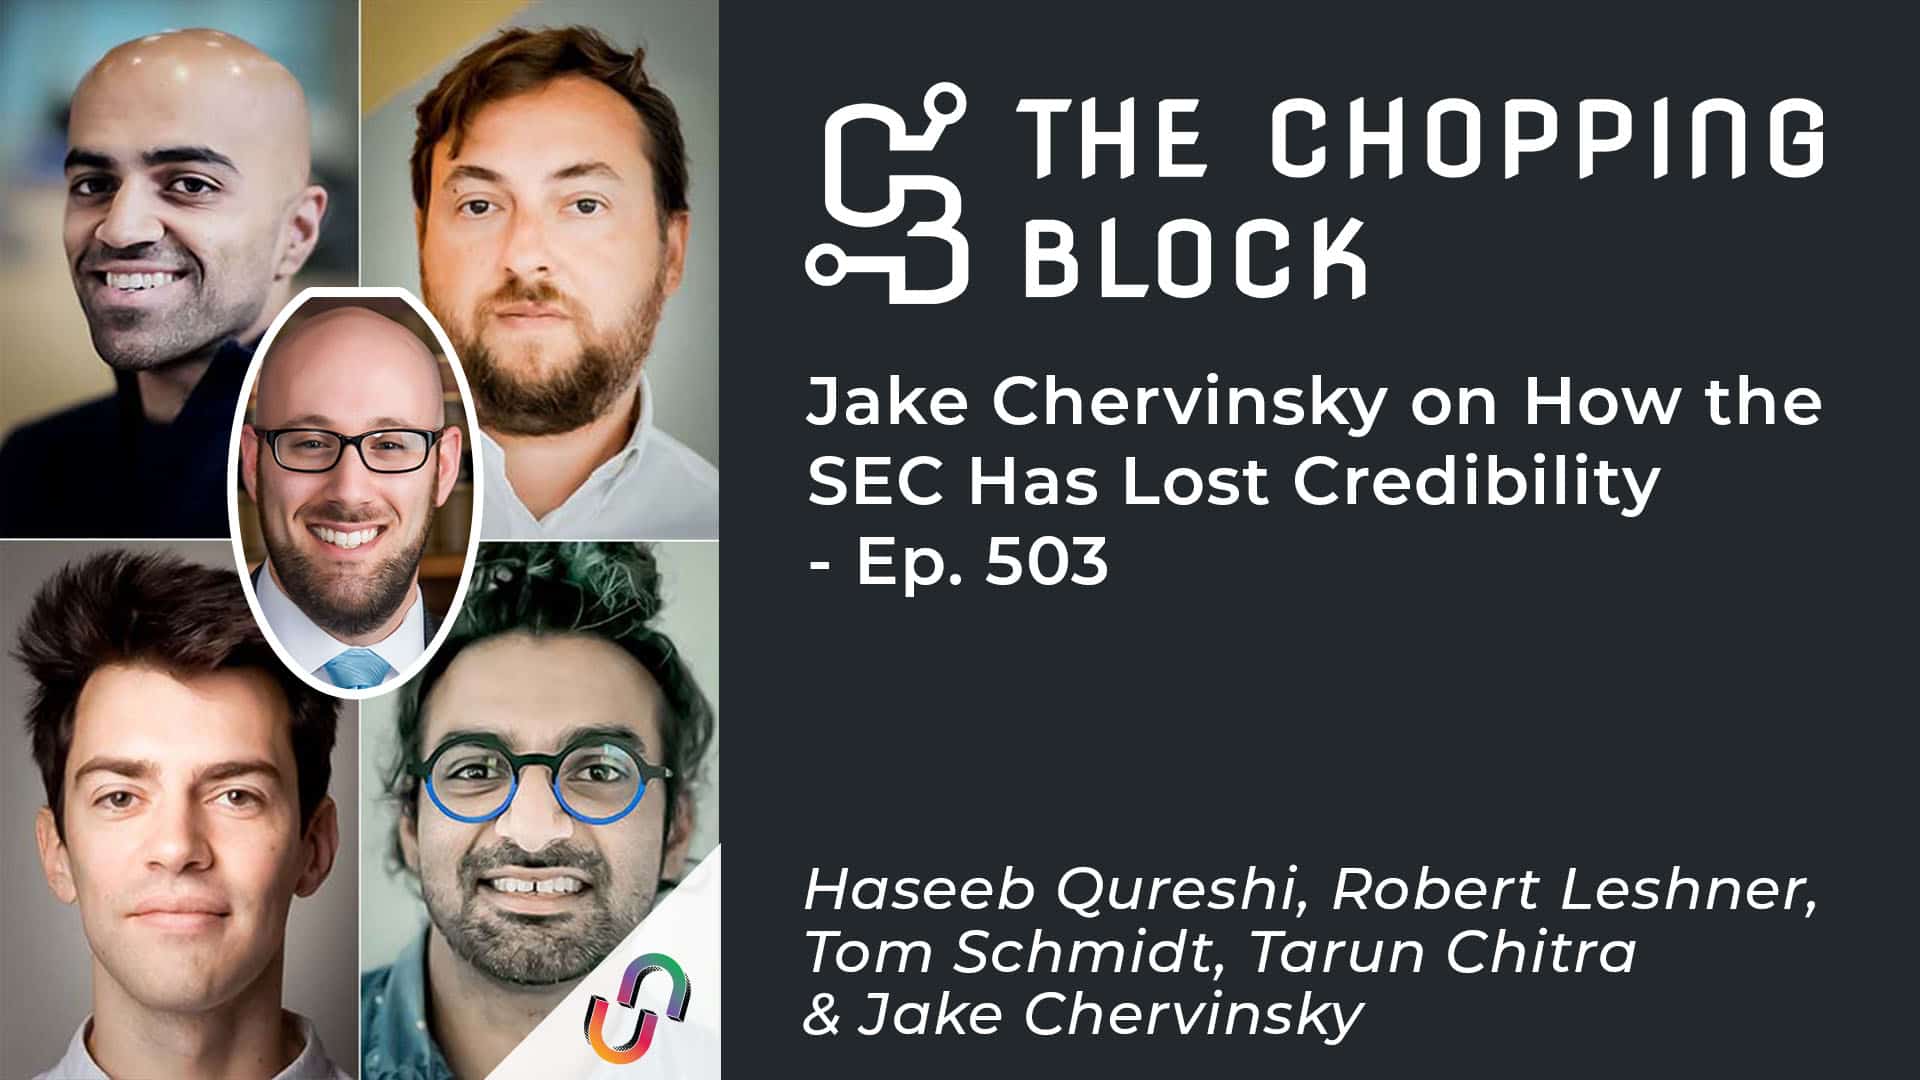 The Chopping Block: Jake Chervinsky on How the SEC Has Lost Credibility - Ep. 503